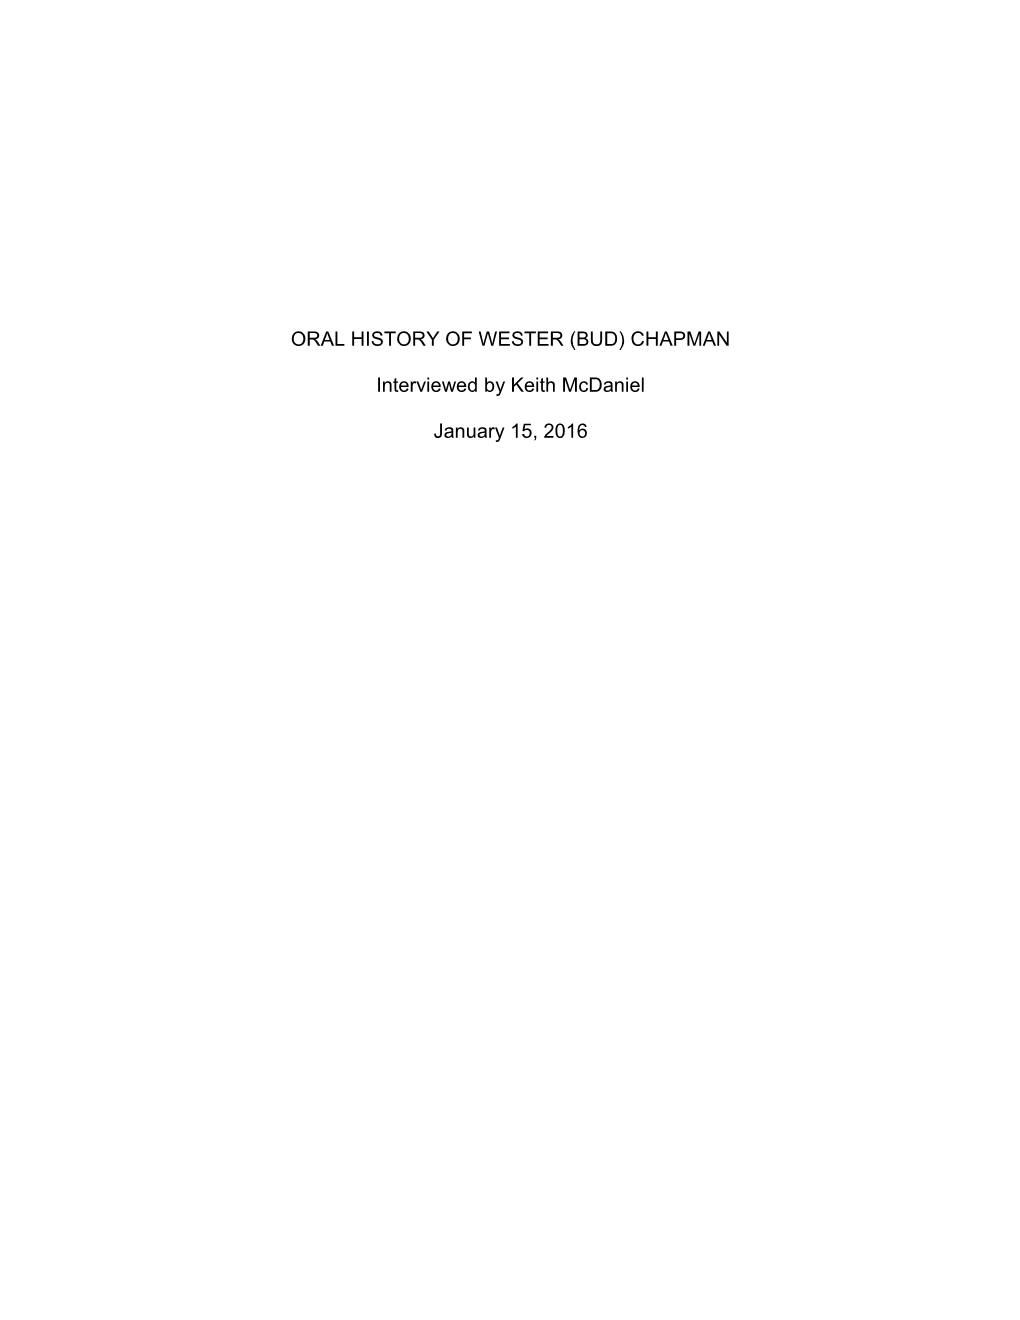 Oral History of Wester (Bud) Chapman